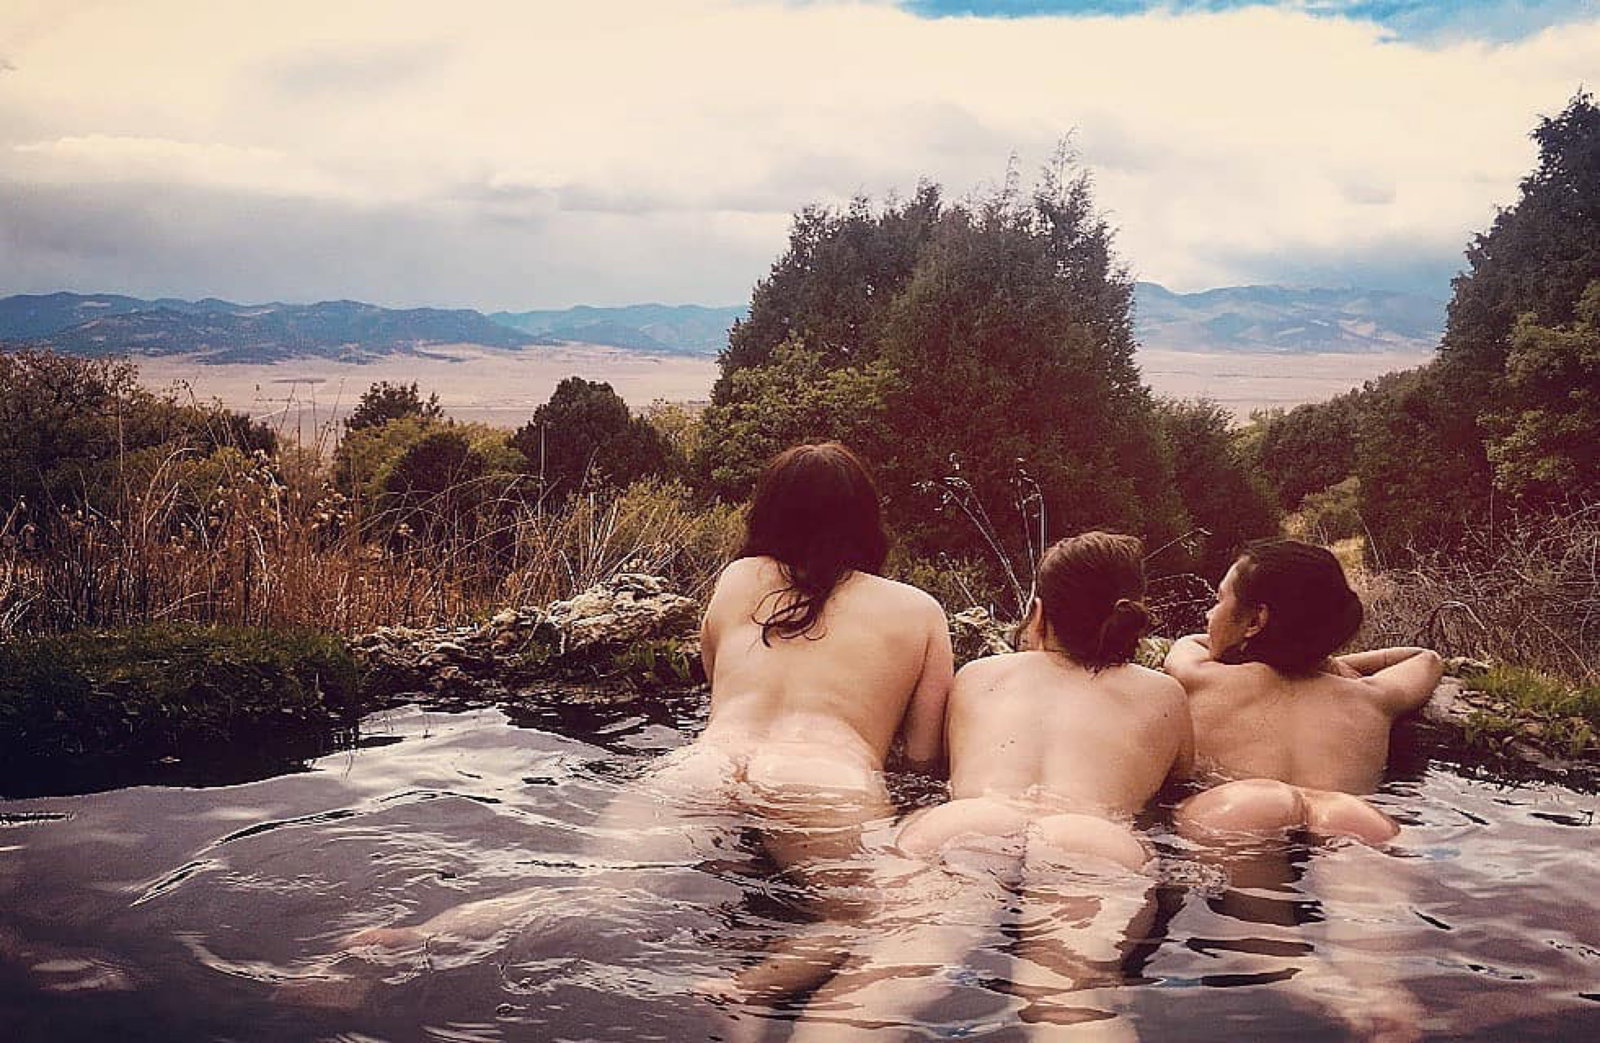 Watch the Photo by rysvdcafeq with the username @rysvdcafeq, posted on November 12, 2019. The post is about the topic Hot Springs. and the text says '61815.jpg'